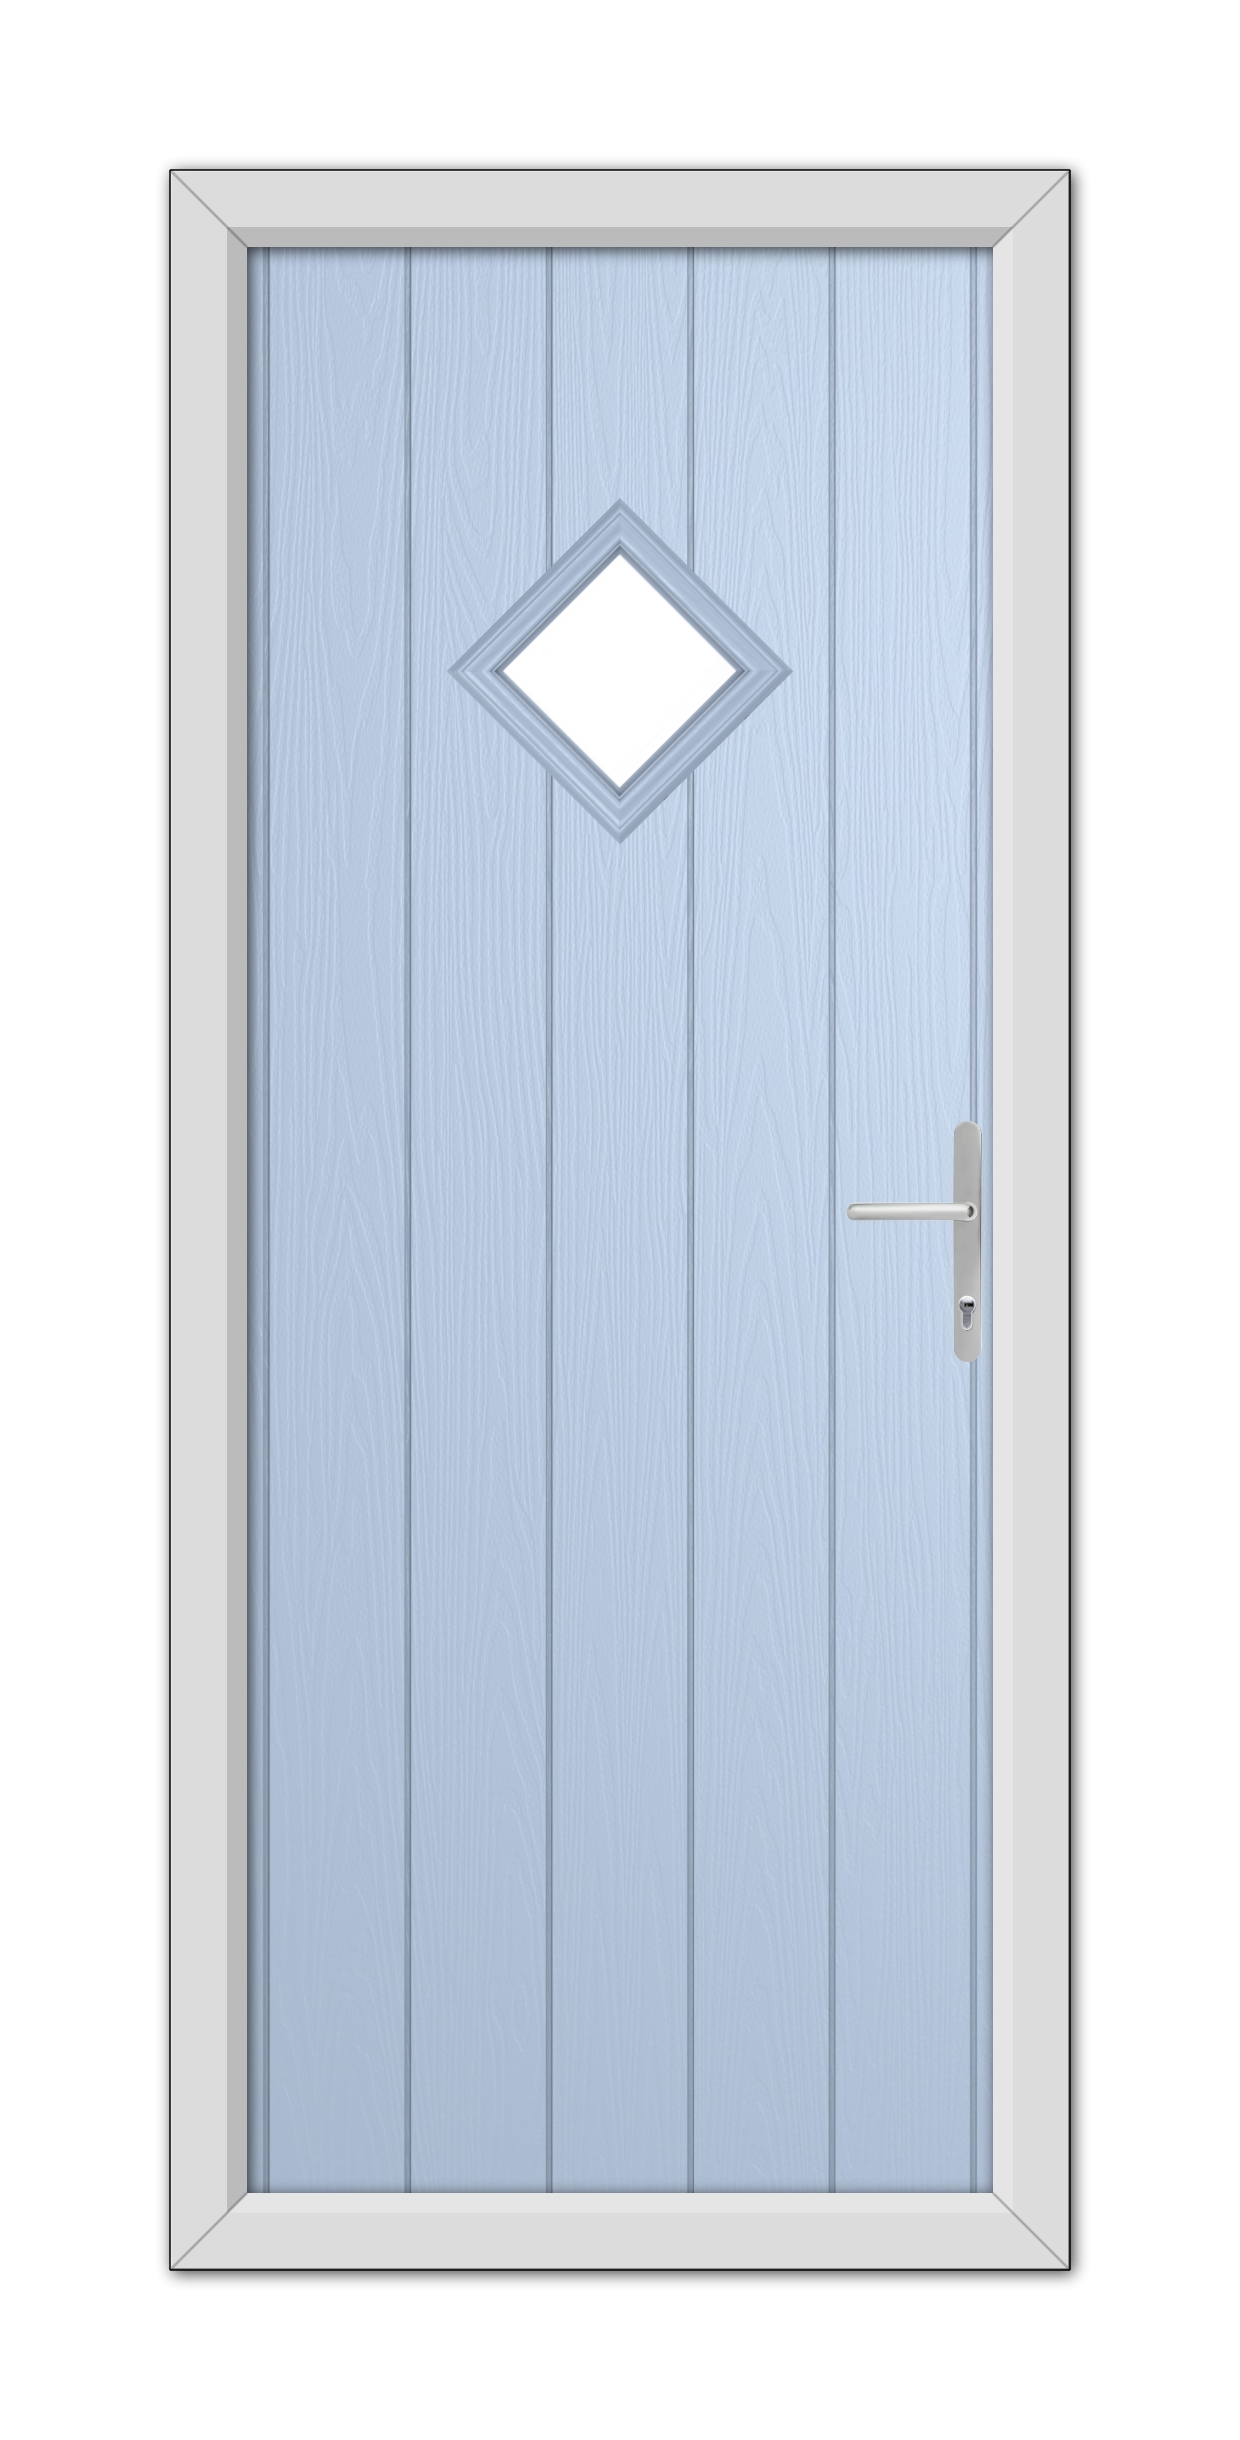 A Duck Egg Blue Cornwall Composite Door 48mm Timber Core with a diamond-shaped window and a modern silver handle, set in a white frame.